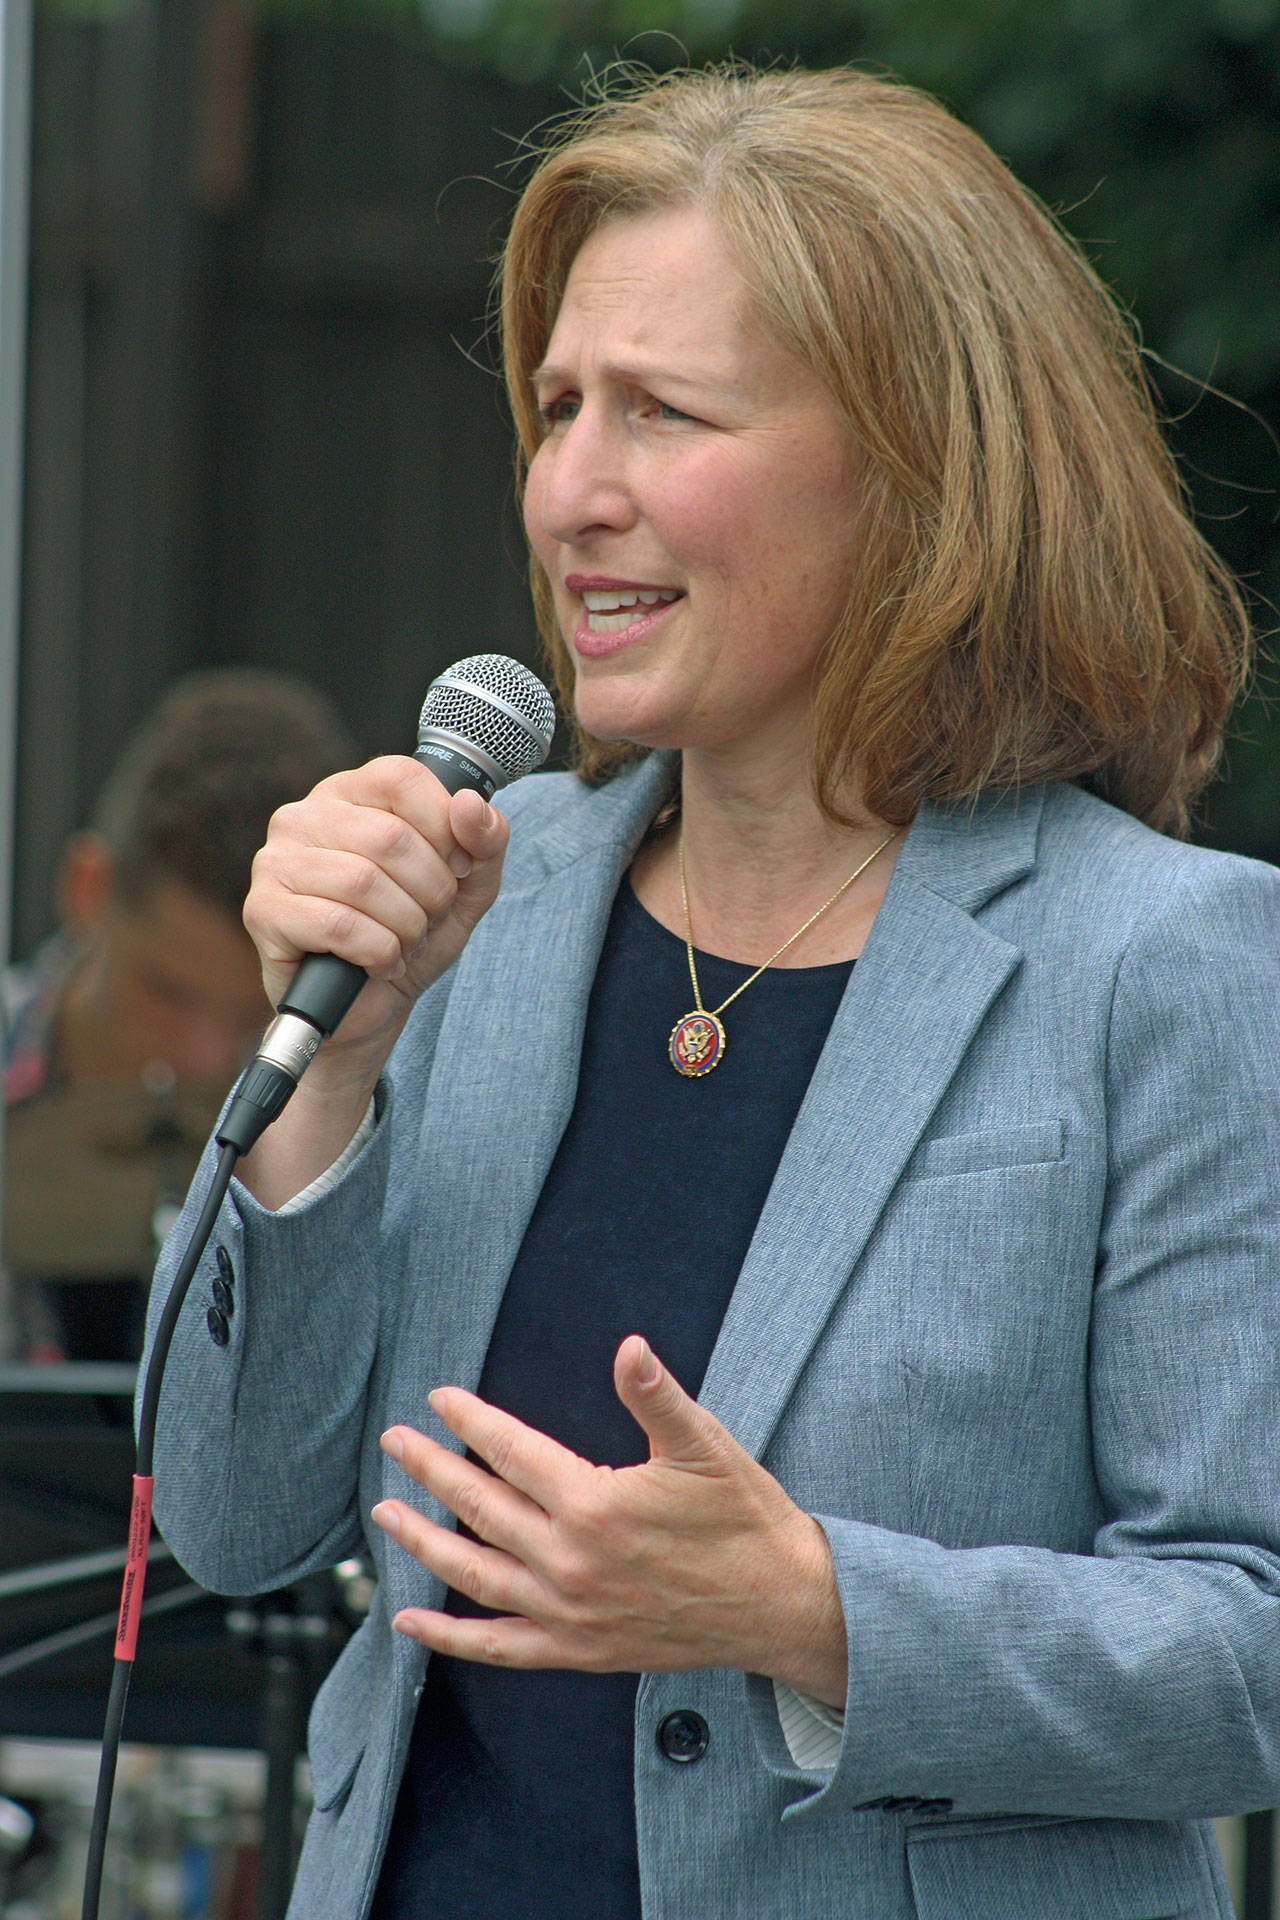 U.S. Rep. Kim Schrier, D-Wash., speaks to a gathering outside HealthPoint Auburn North on Thursday afternoon. The Congresswoman talked about the importance of childhood immunizations. MARK KLAAS, Kent Reporter